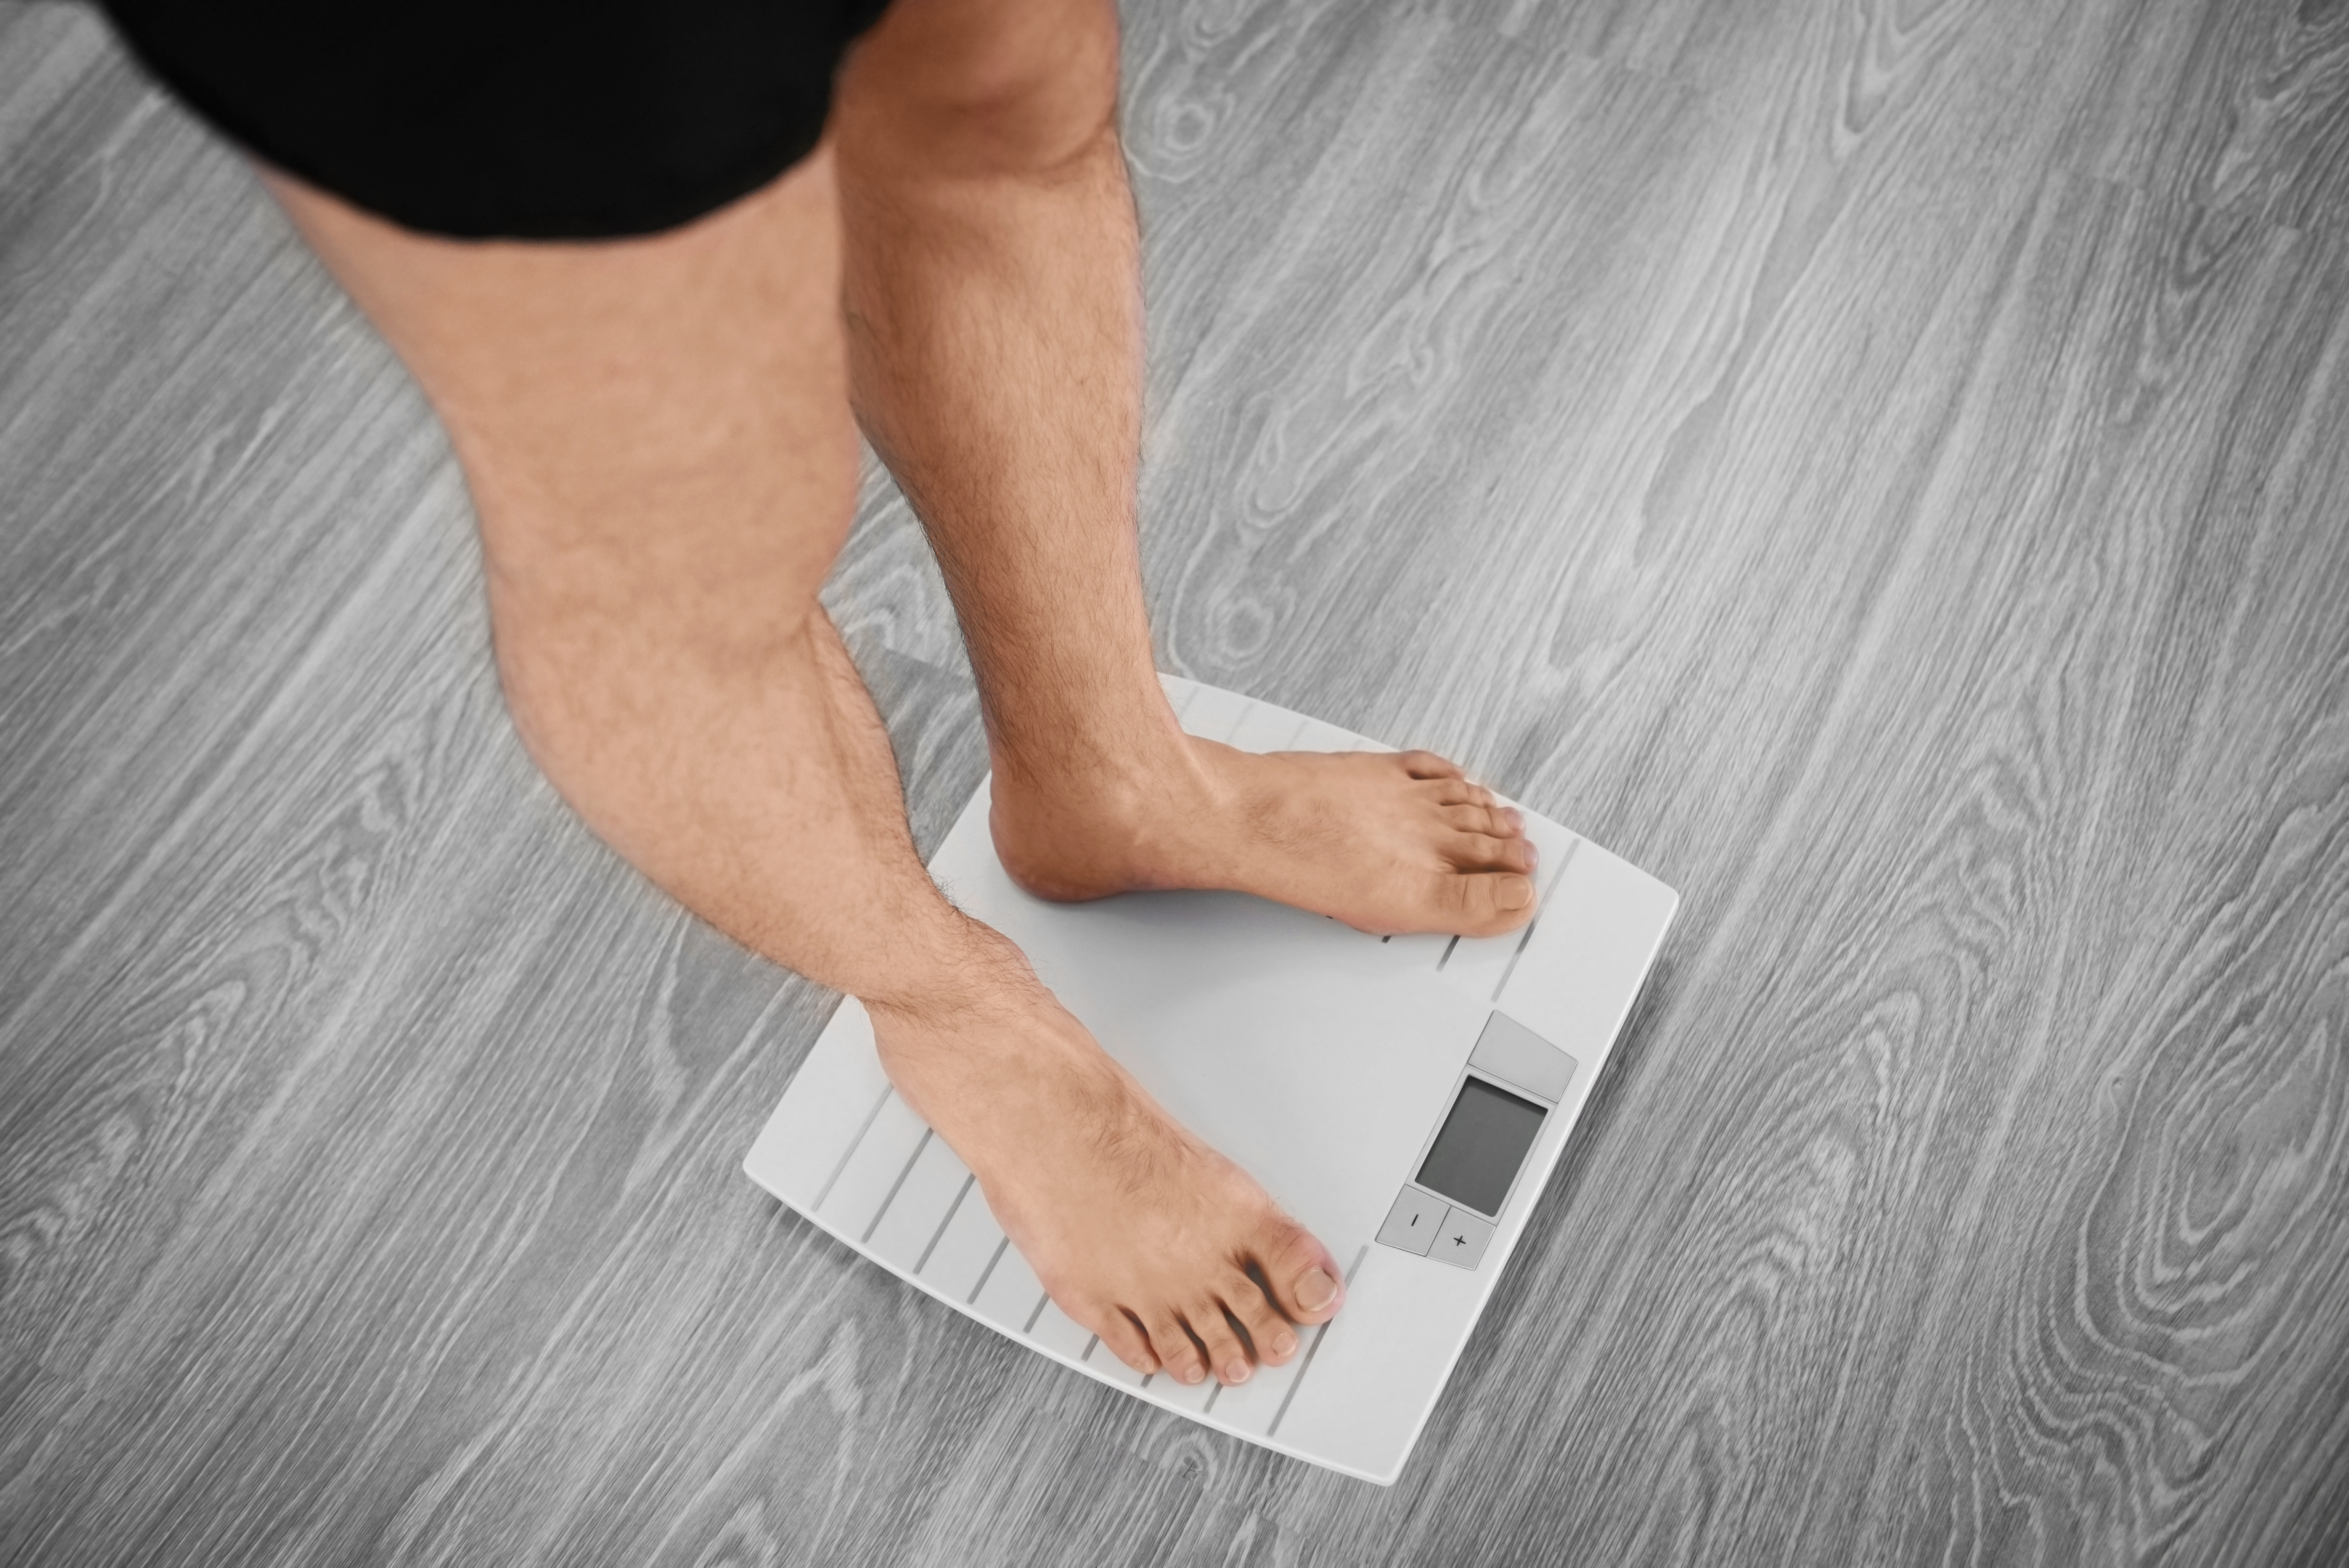 Lower body shot of a white man with slim legs, standing on an electronic weight scale which has been placed on a grey, artificial wood floor